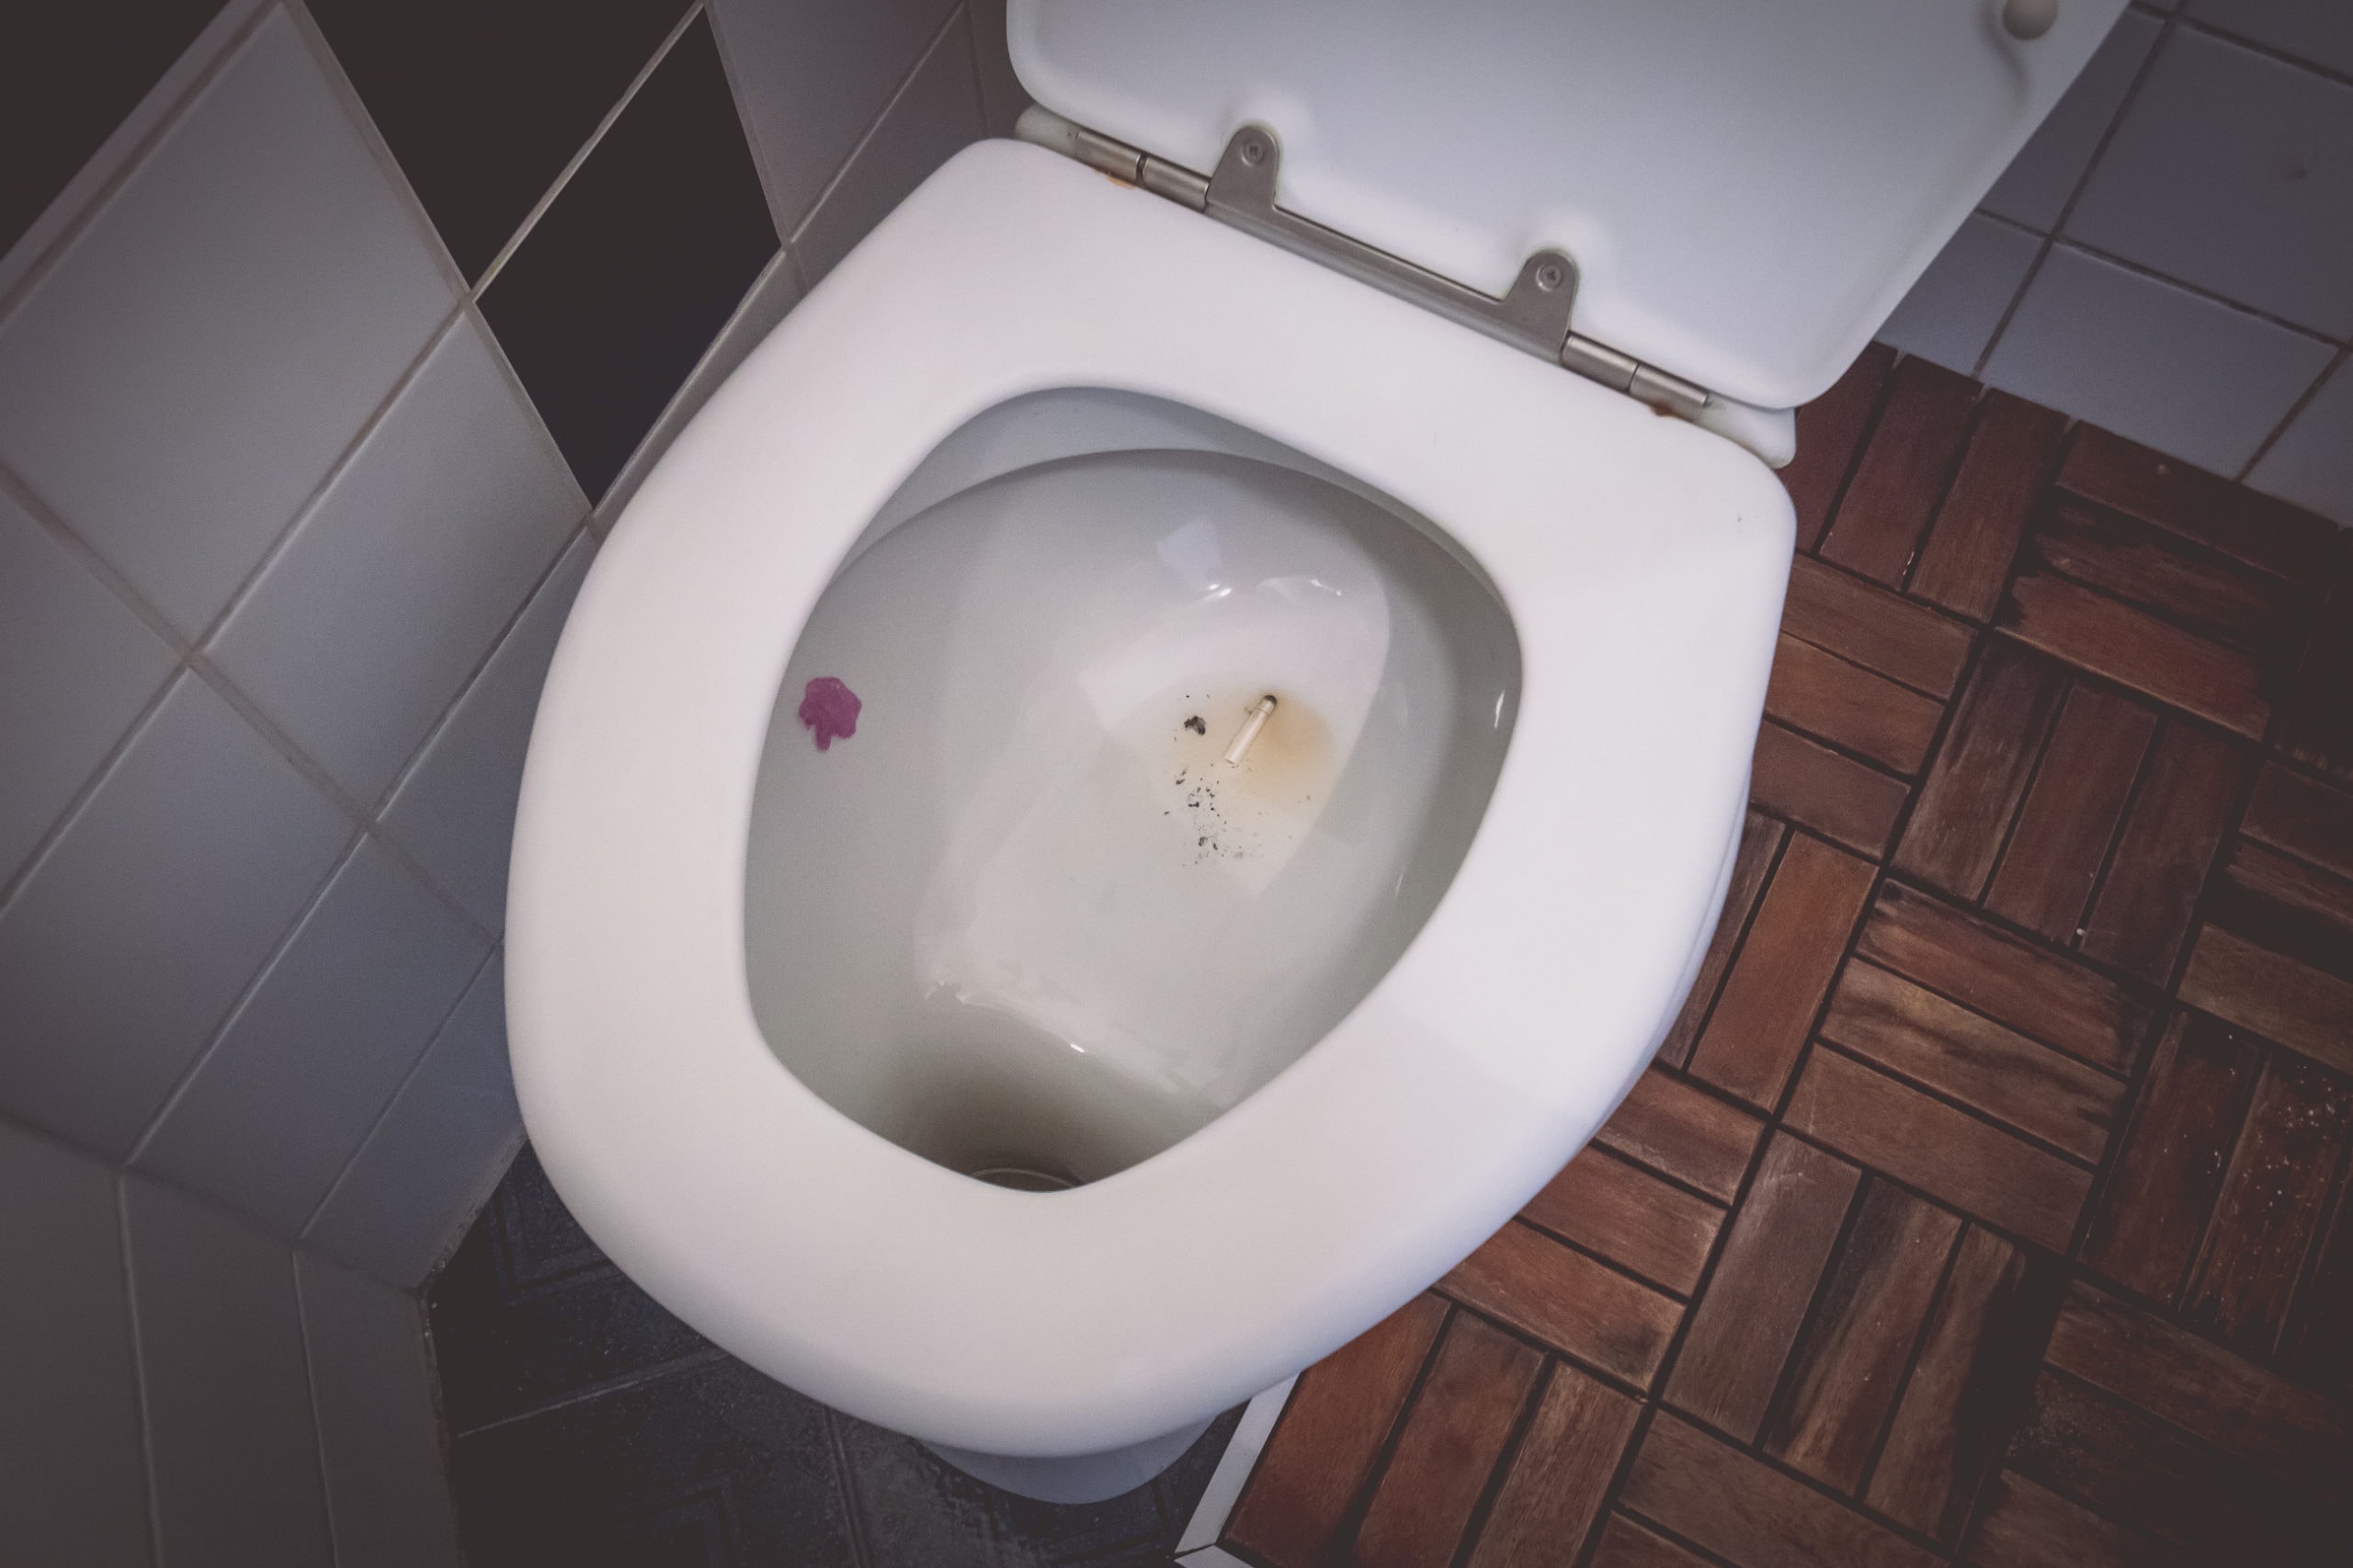 Cigarette butt in a toilet bowl. Cigarette turned down in a bowl of a toilet. Dirty small toilet